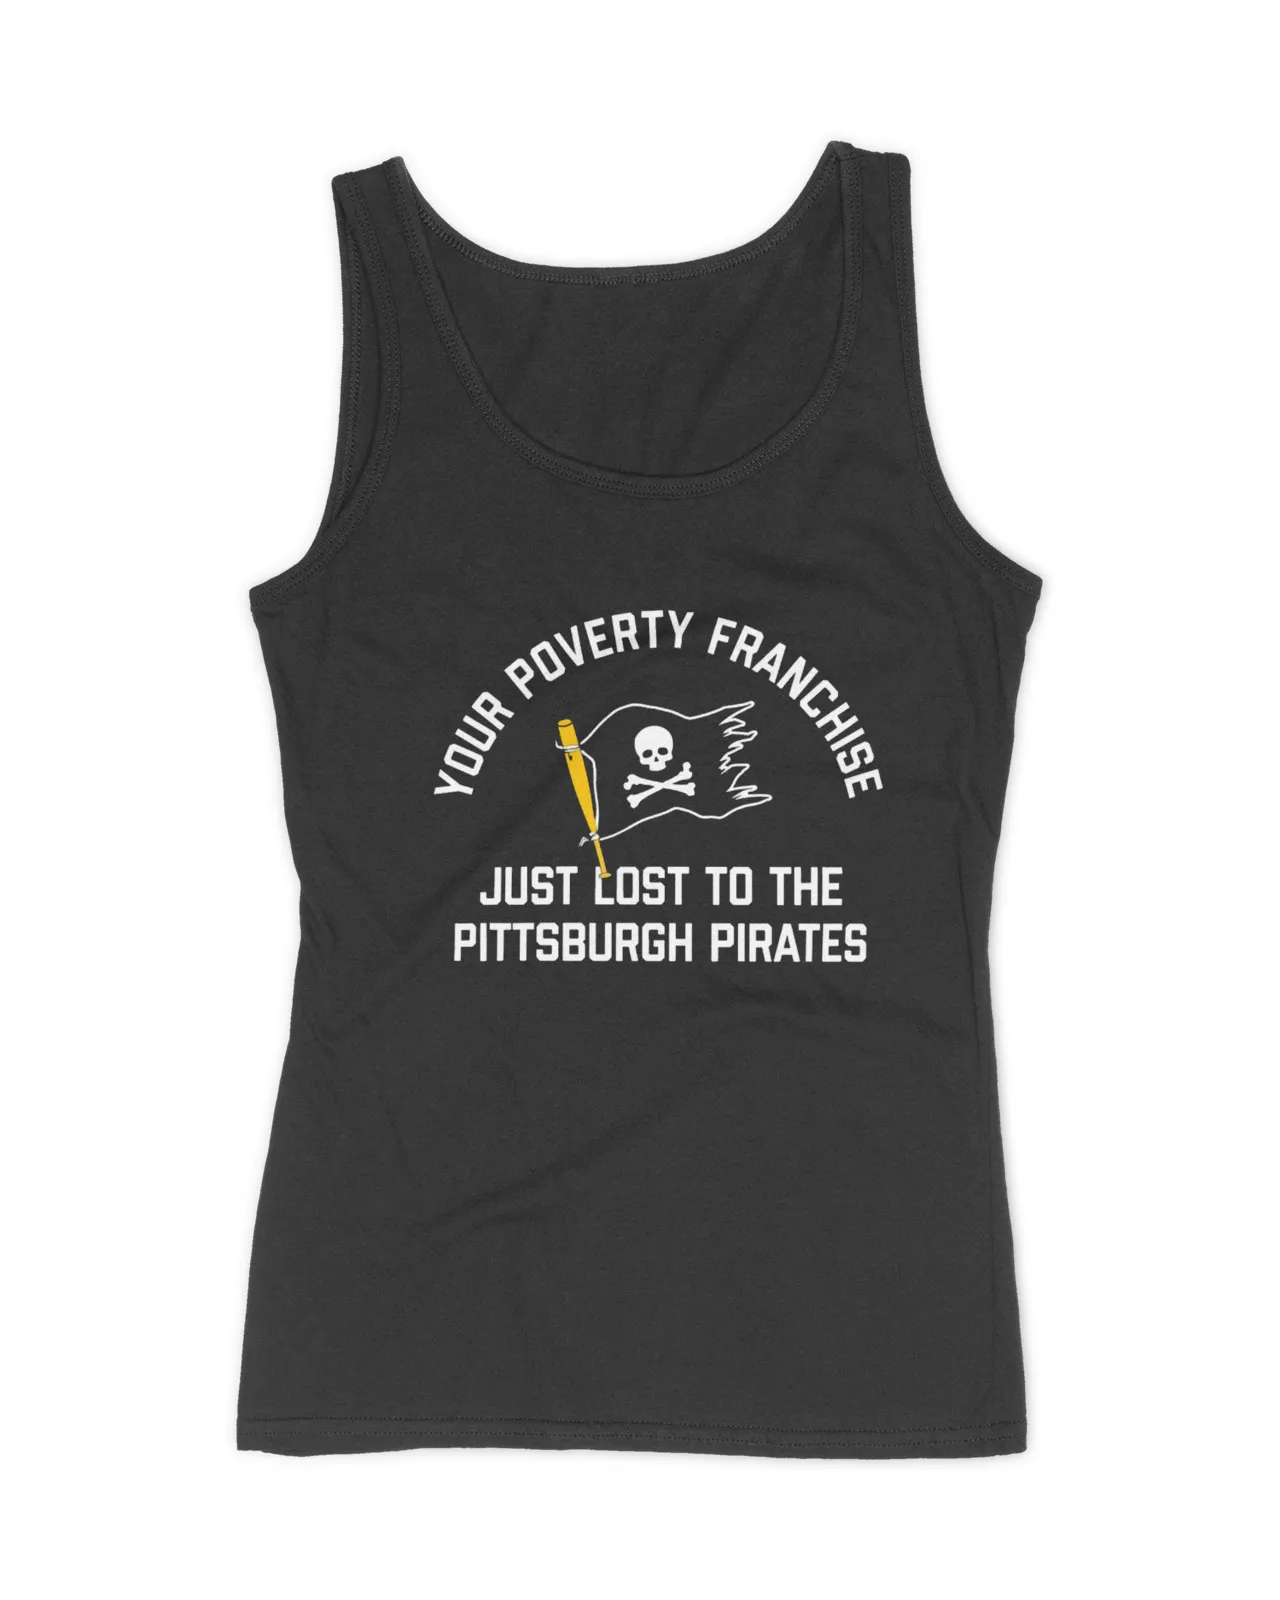 Your Poverty Franchise Just Lost To The Pittsburgh Pirates Shirt
